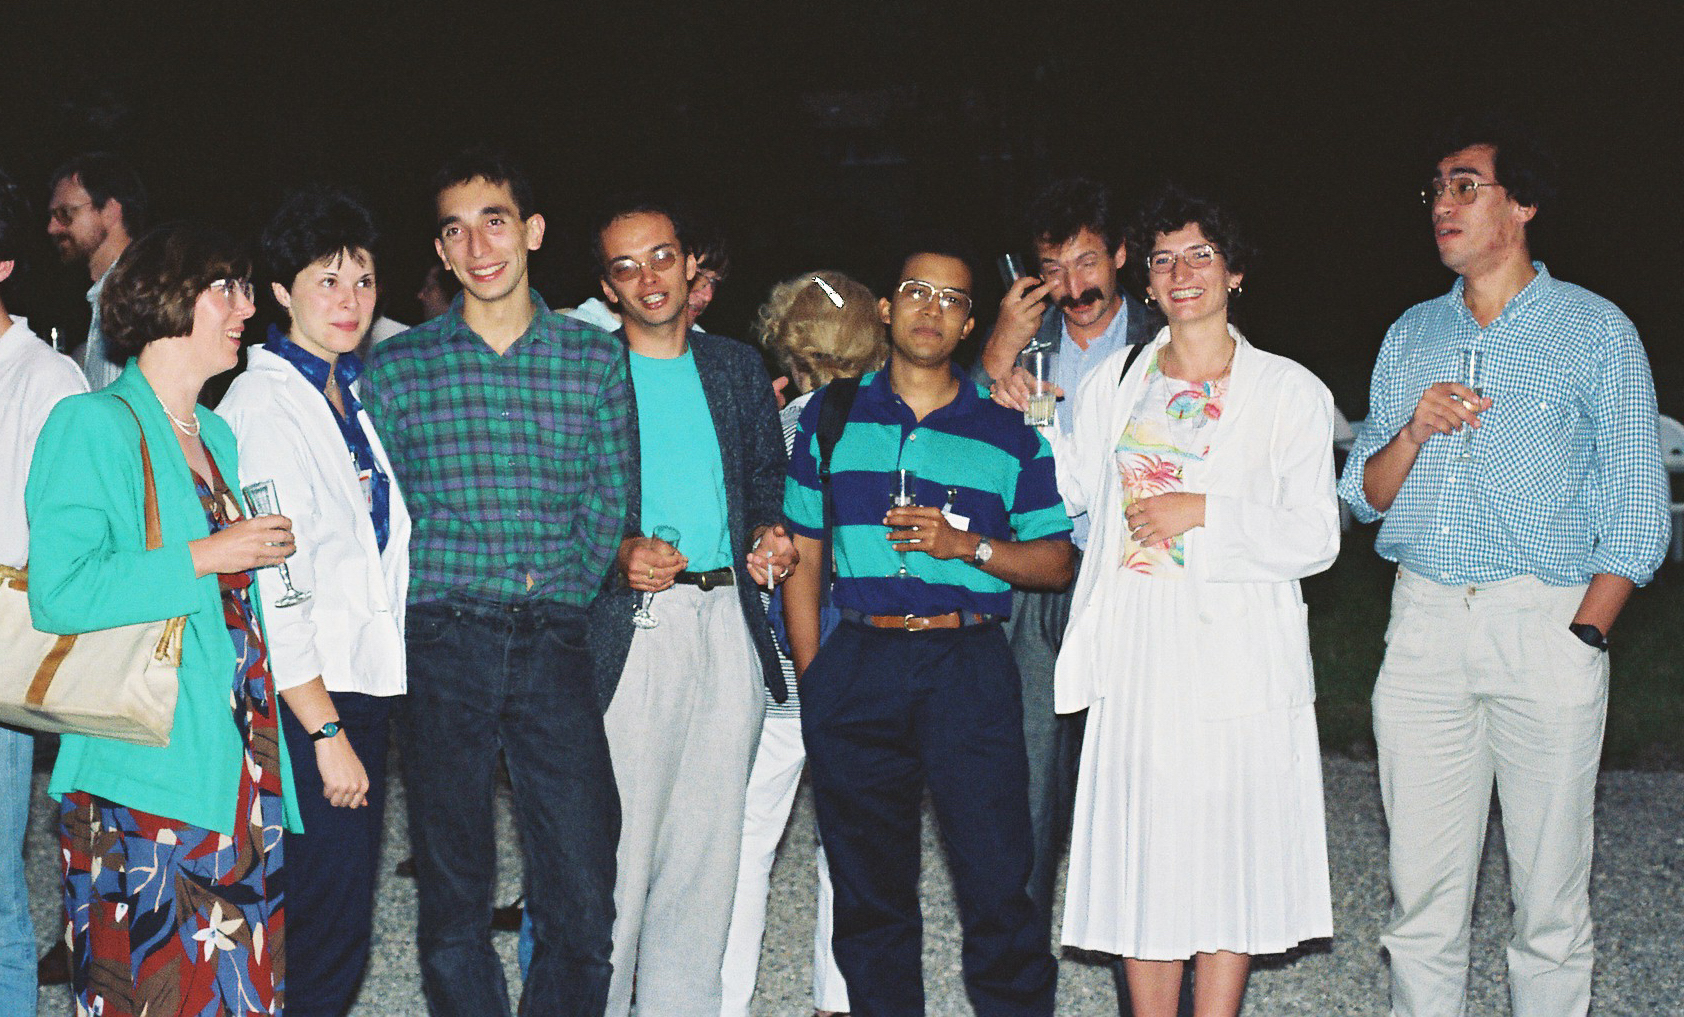 0044-diner-FLagnier-FMaraninchi-HGaravel-JCFernandez-CRodriguez-DPilaud-ACGlory-ABouajjani-locaux.JPG - The Conference Dinner -- the Verimag group (not yet called Verimag at that time)